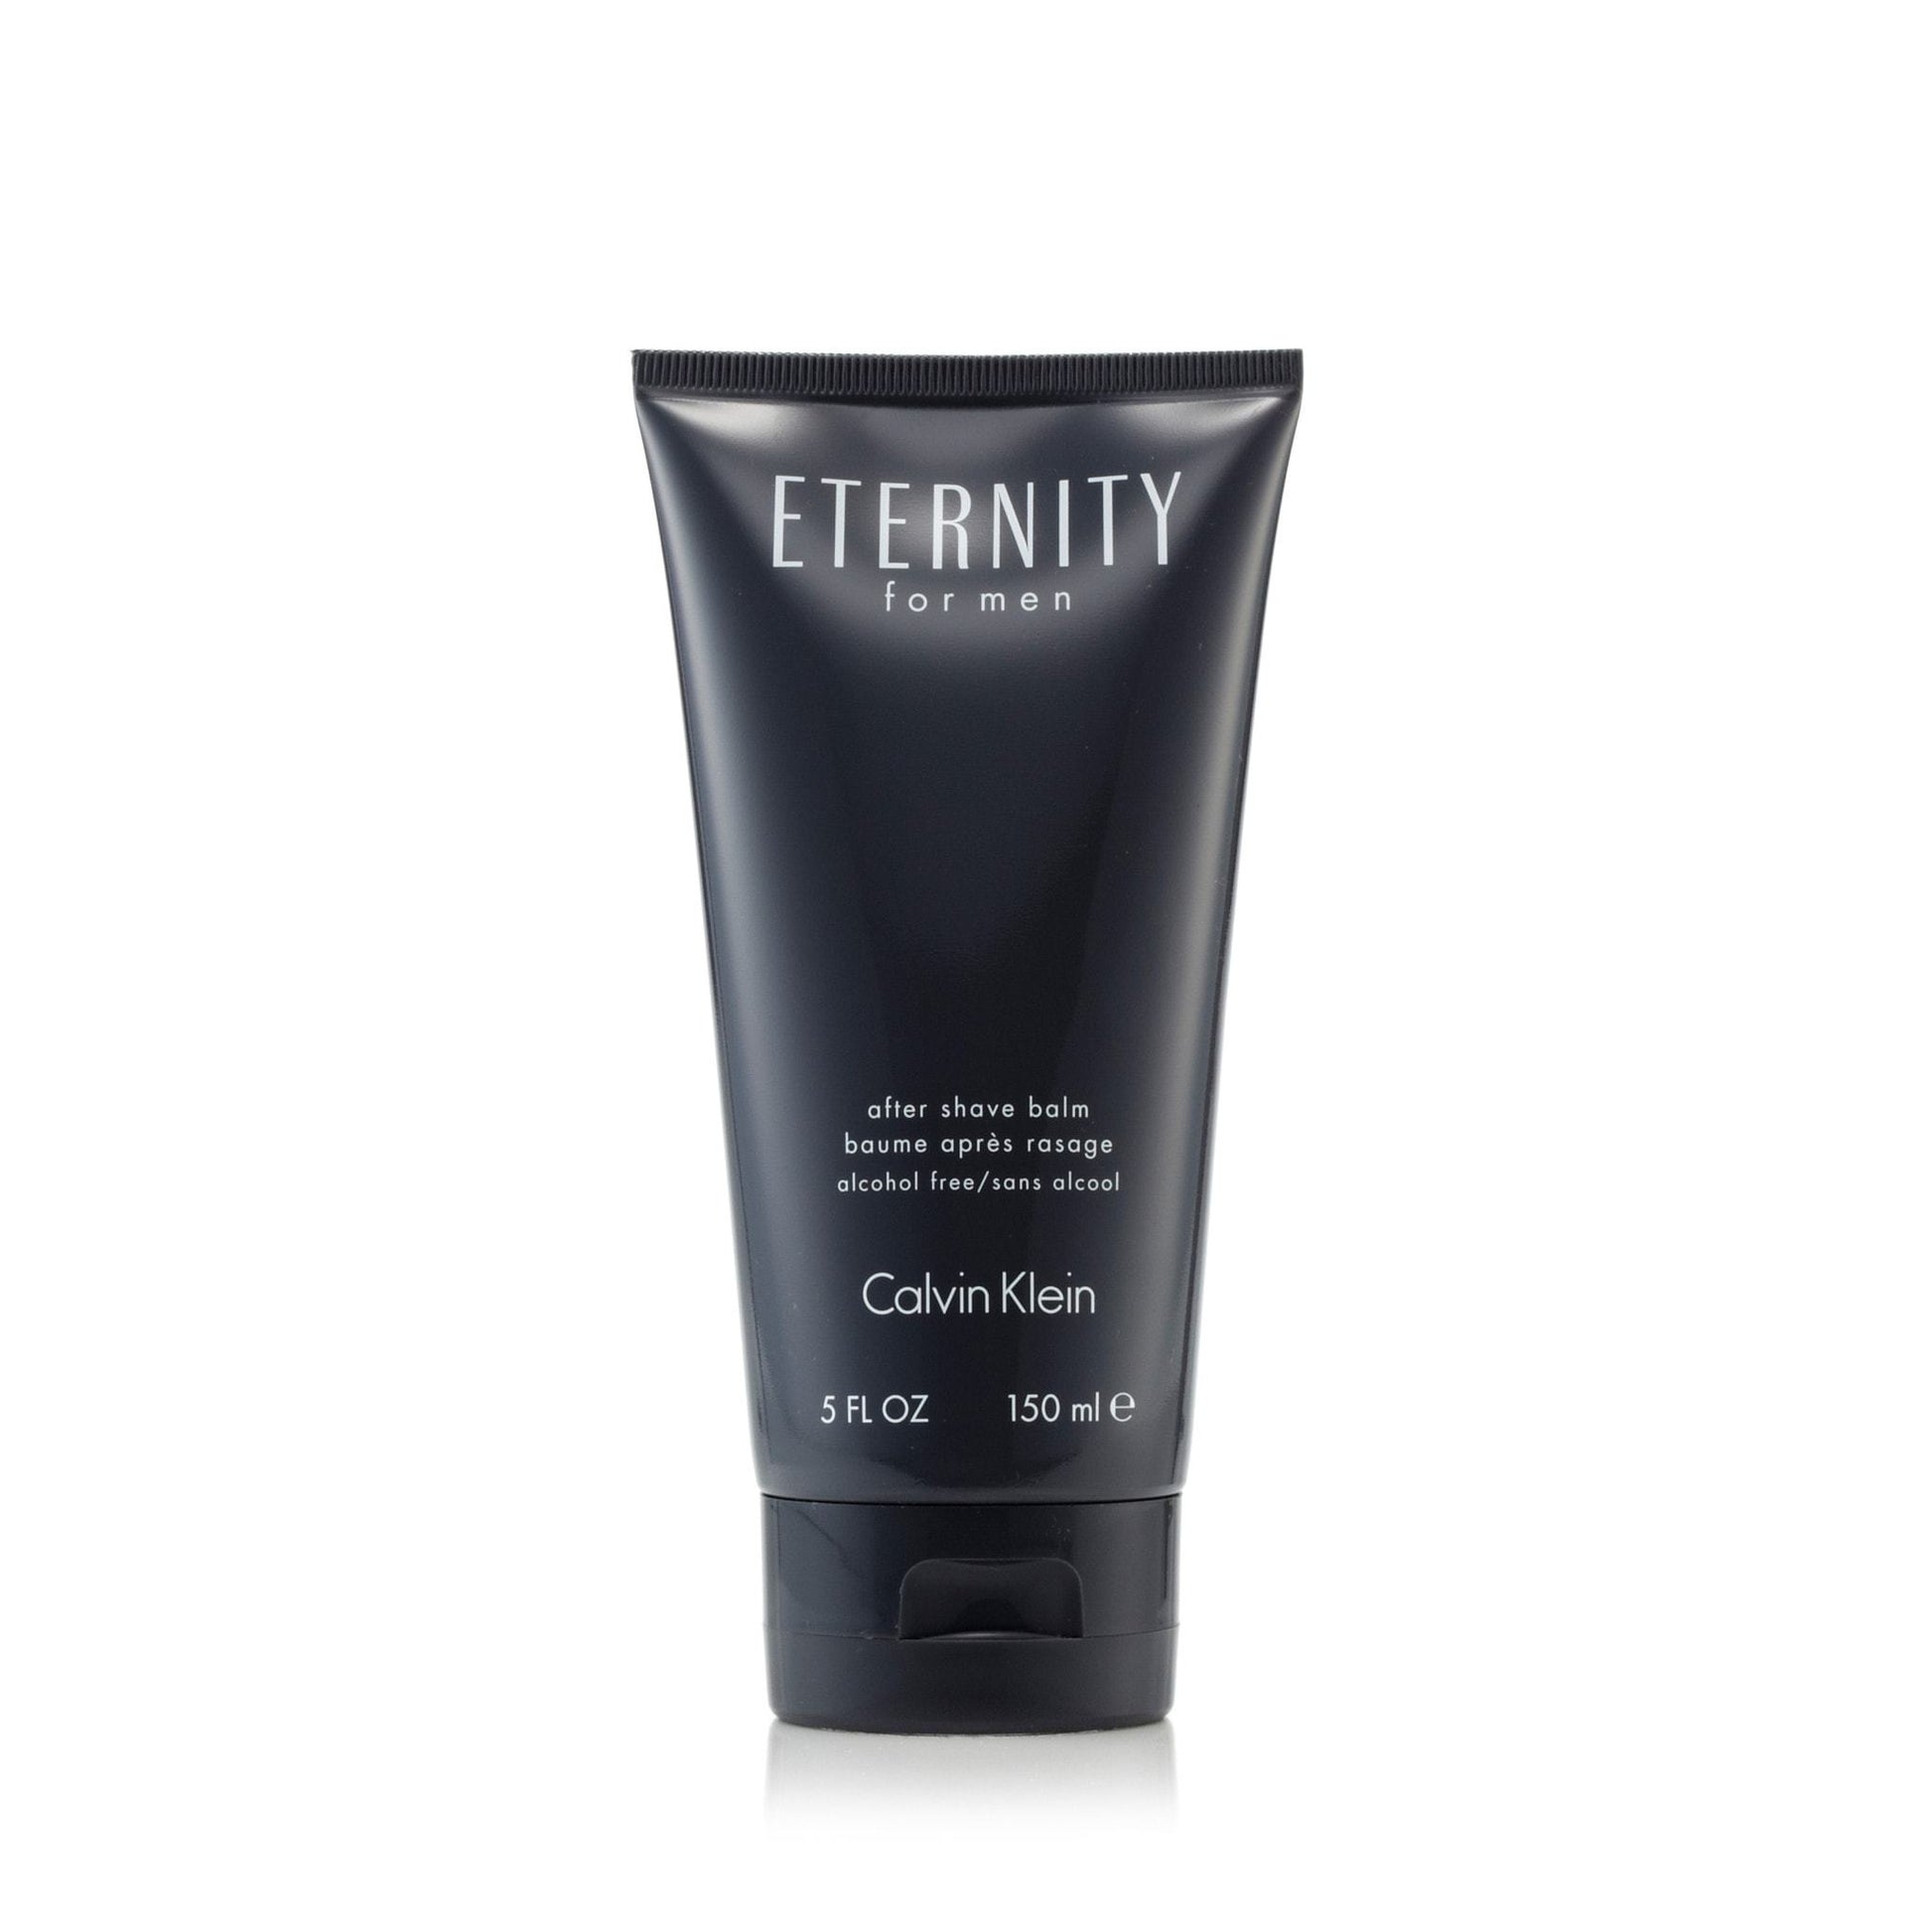 Eternity After Shave Balm for Men by Calvin Klein, Product image 1